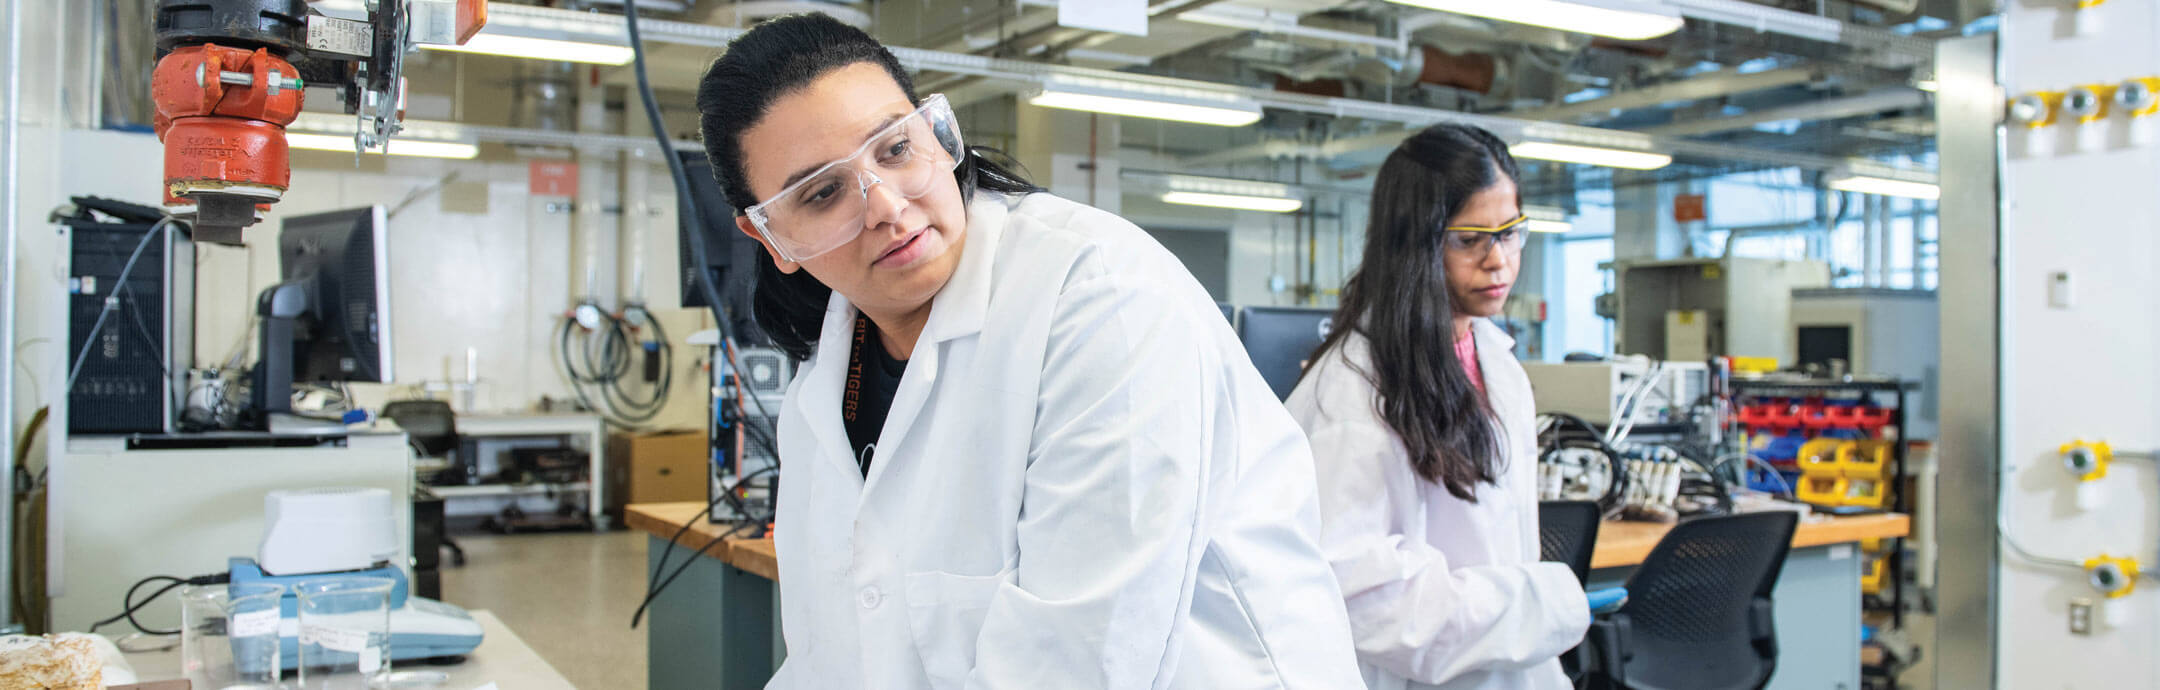 Two female students in white lab coats working in a lab